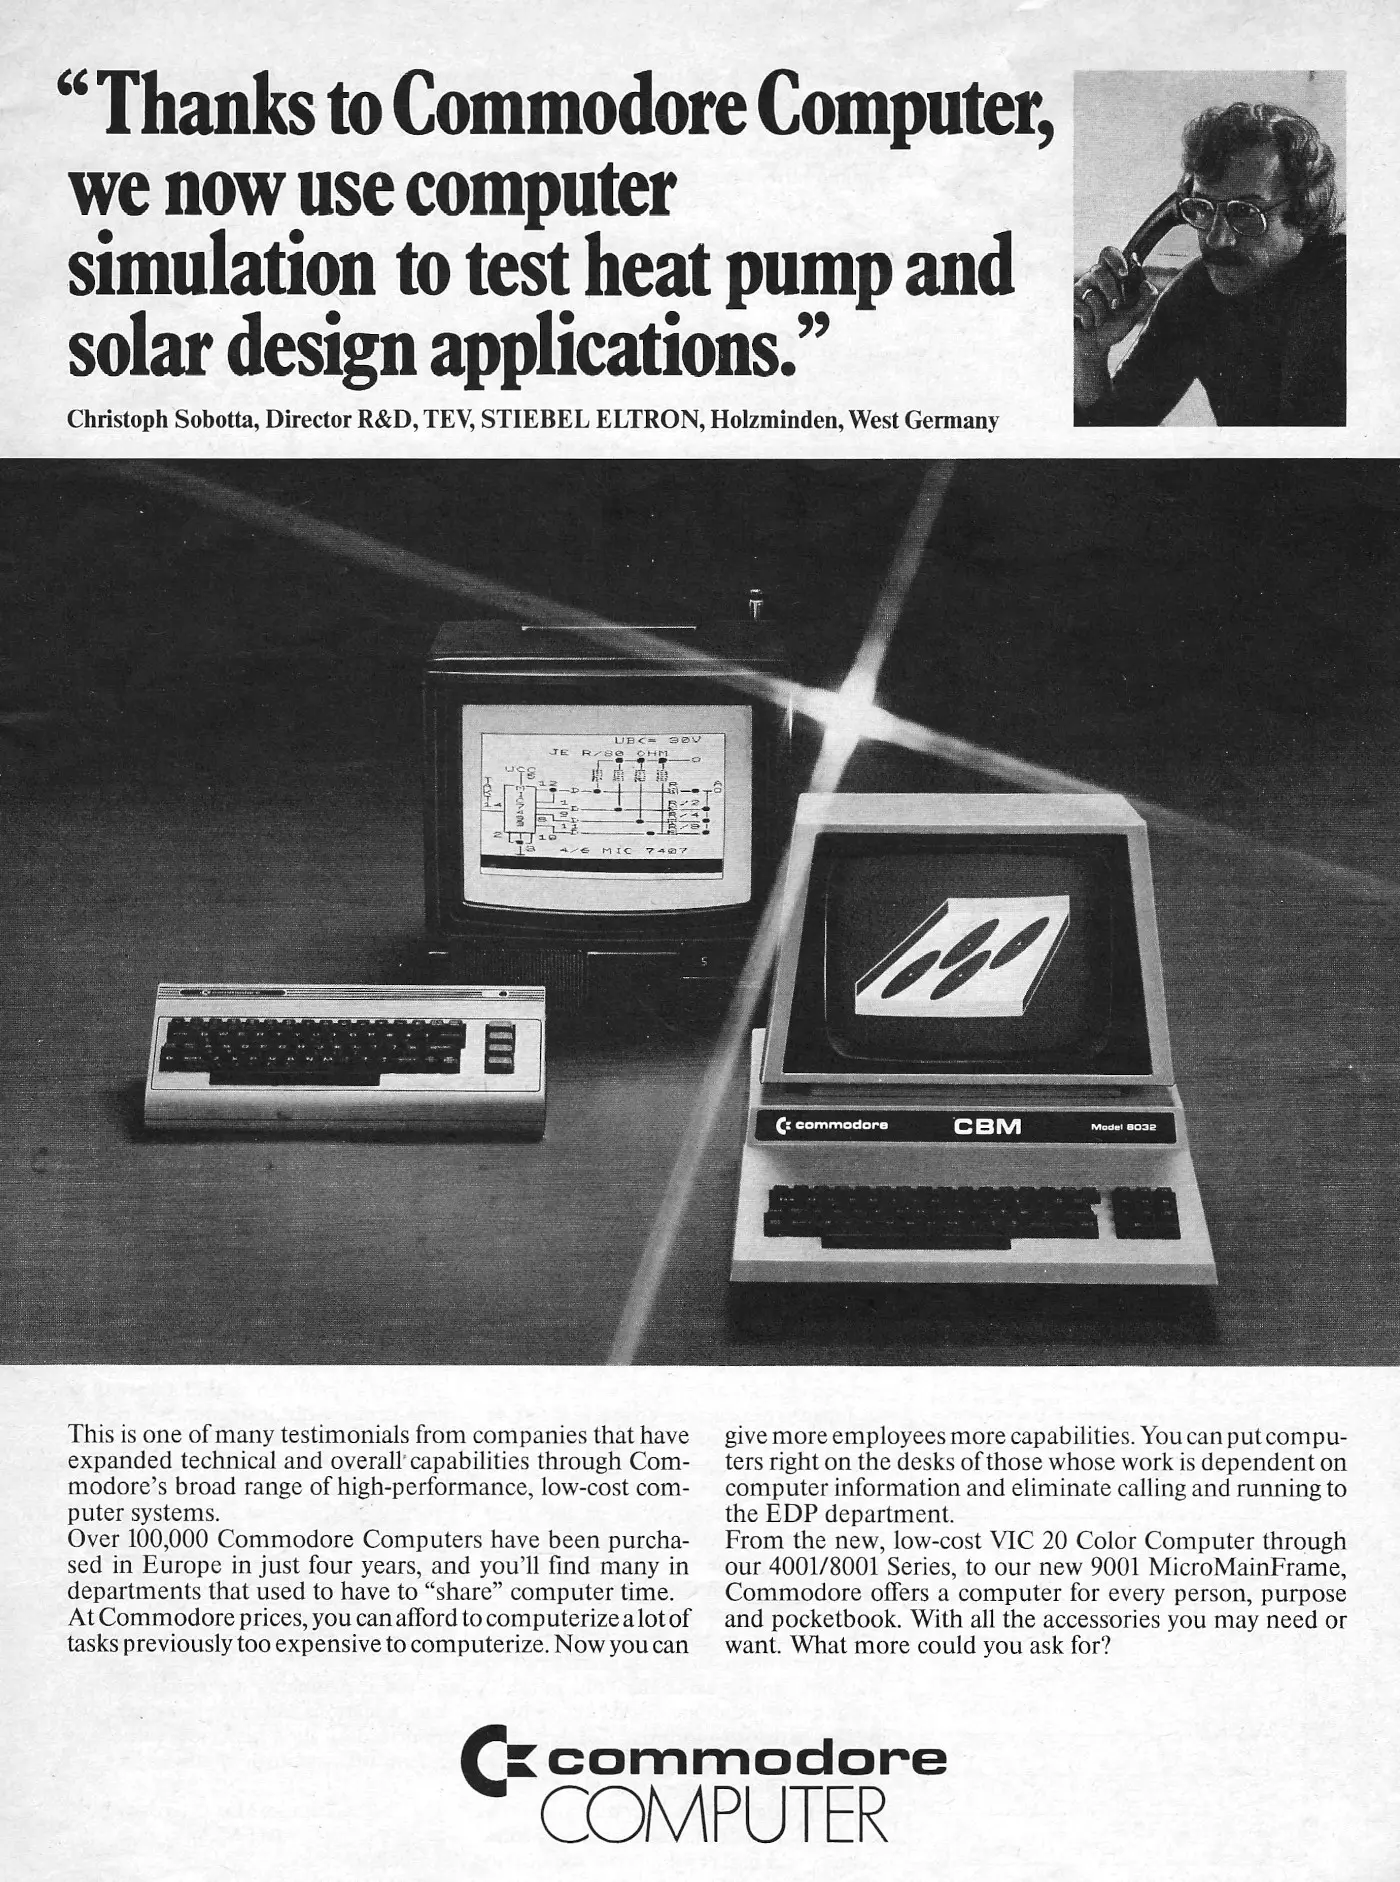 Commodore Advert: Thanks to Commodore Computer we now use computer simulation to test heat pump and solar design applications, from Magazine, 1981